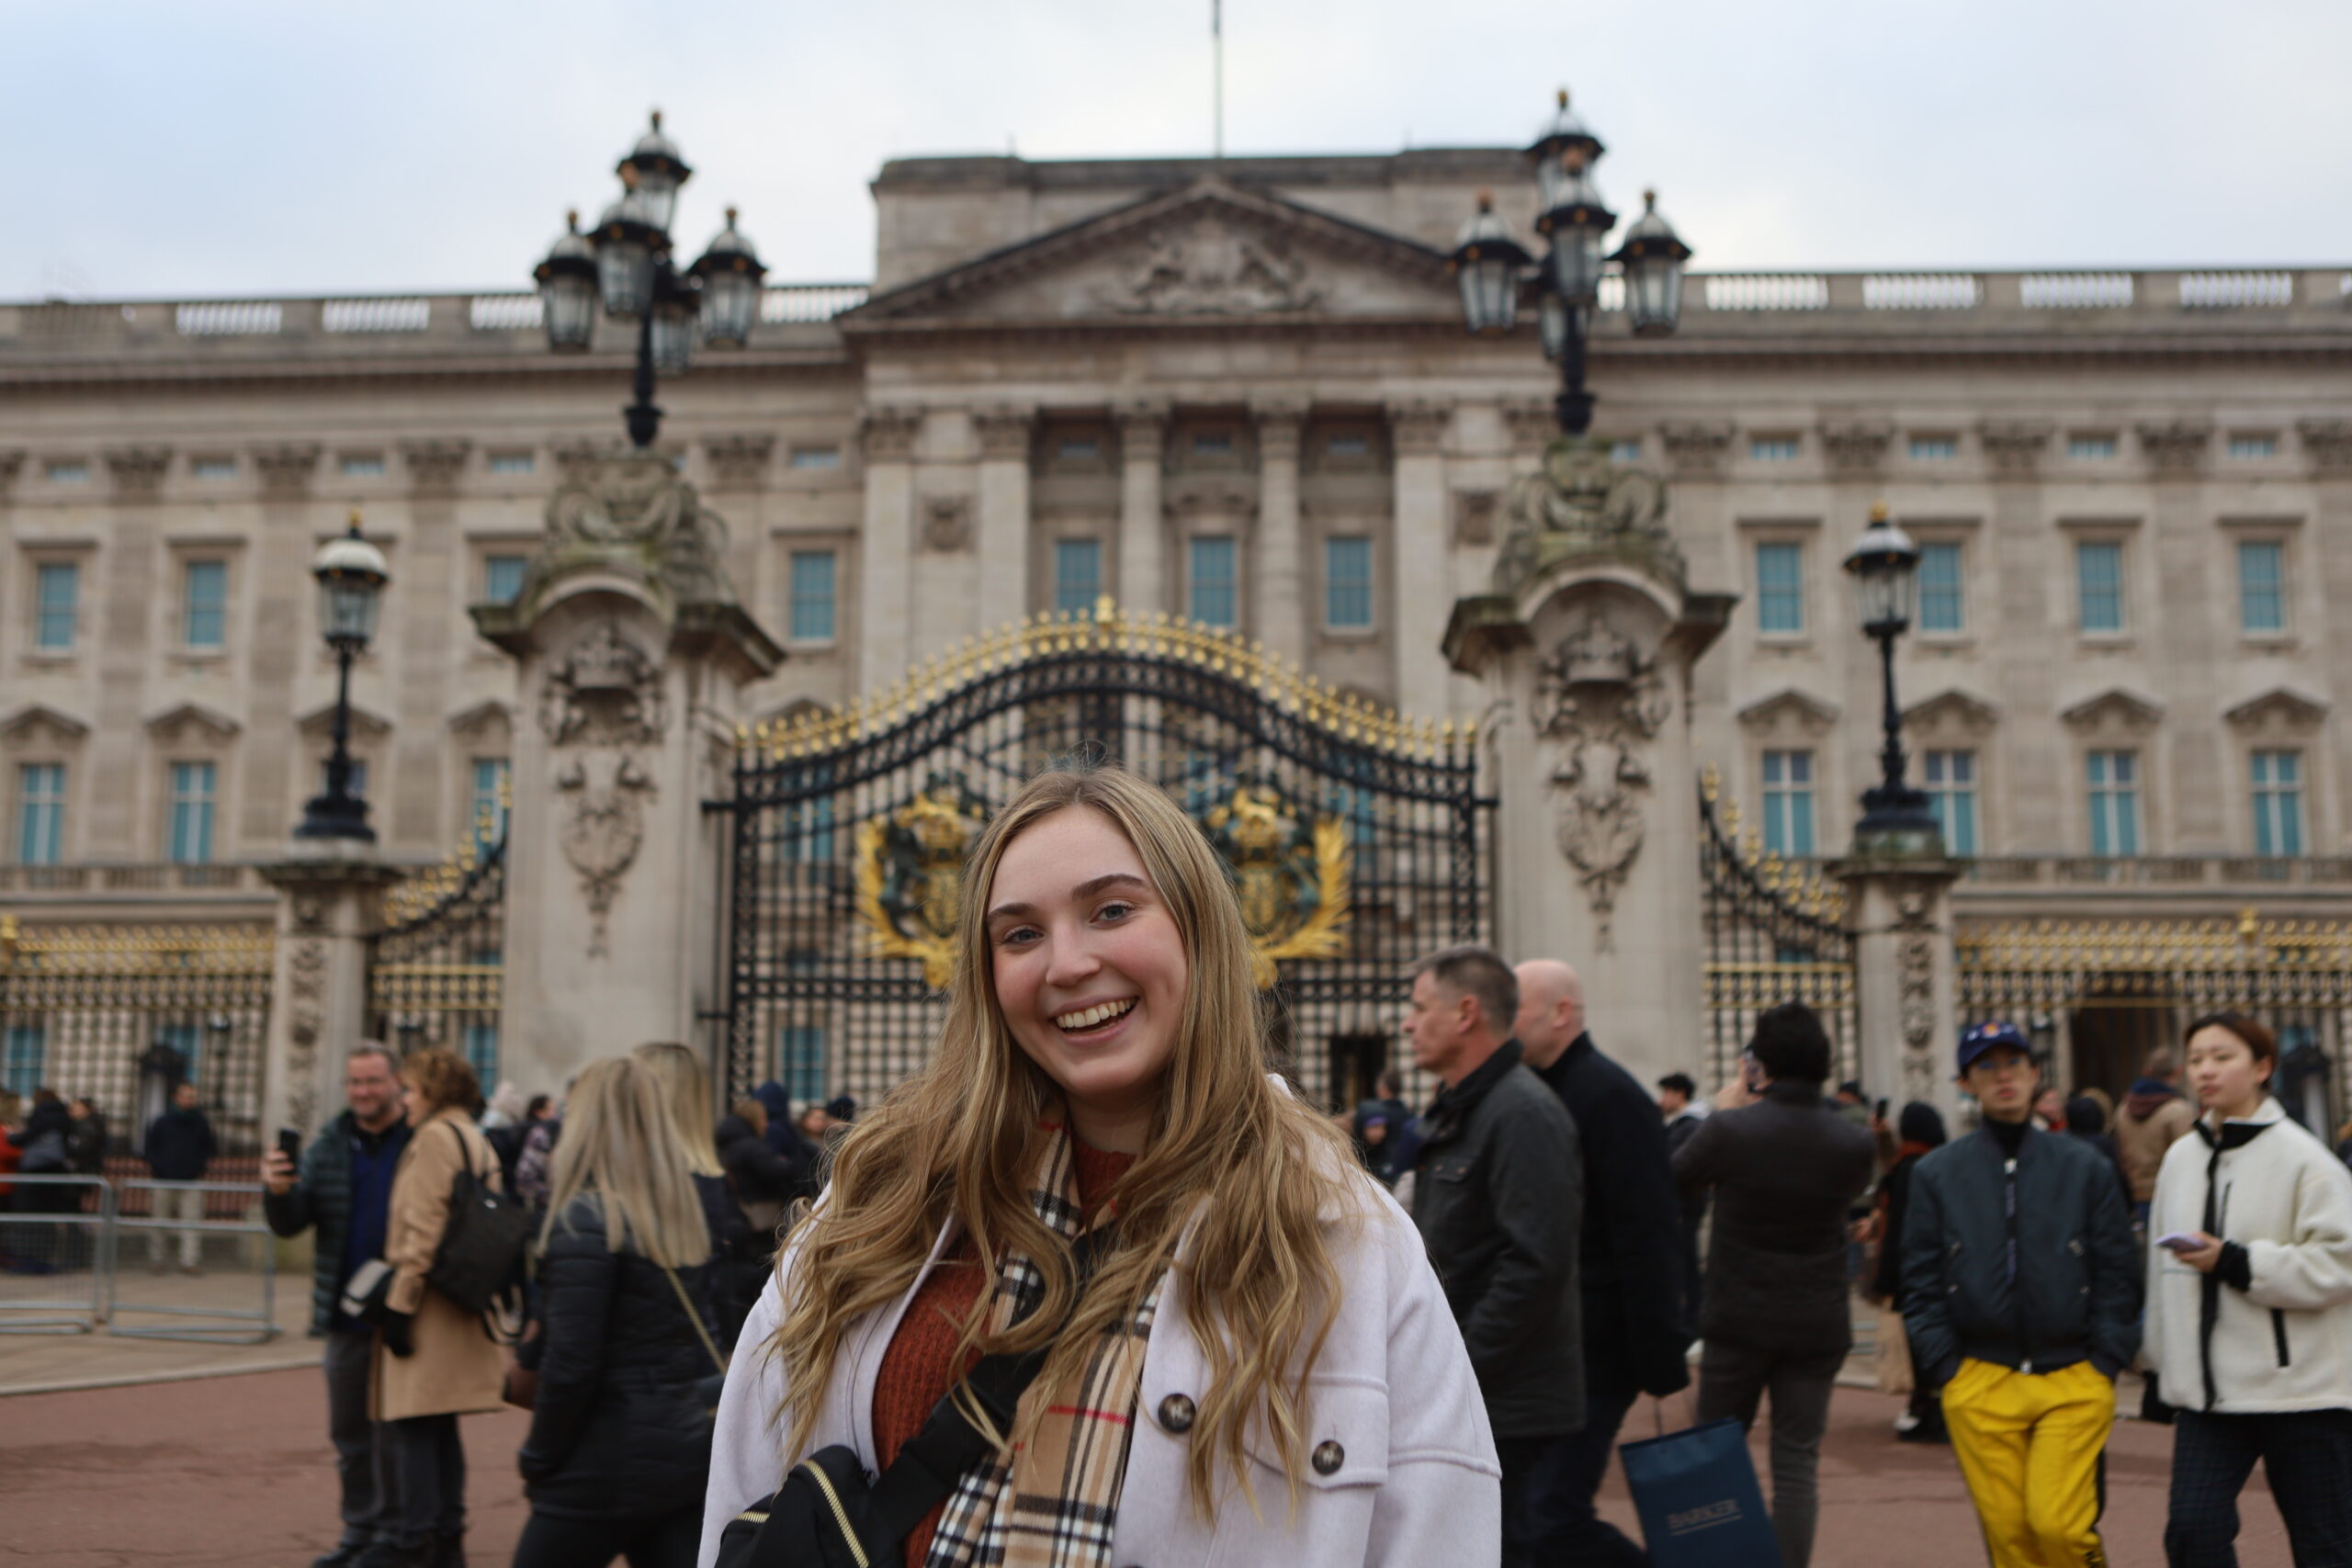 LVC student Abbey Delisio in front of Buckingham Palace